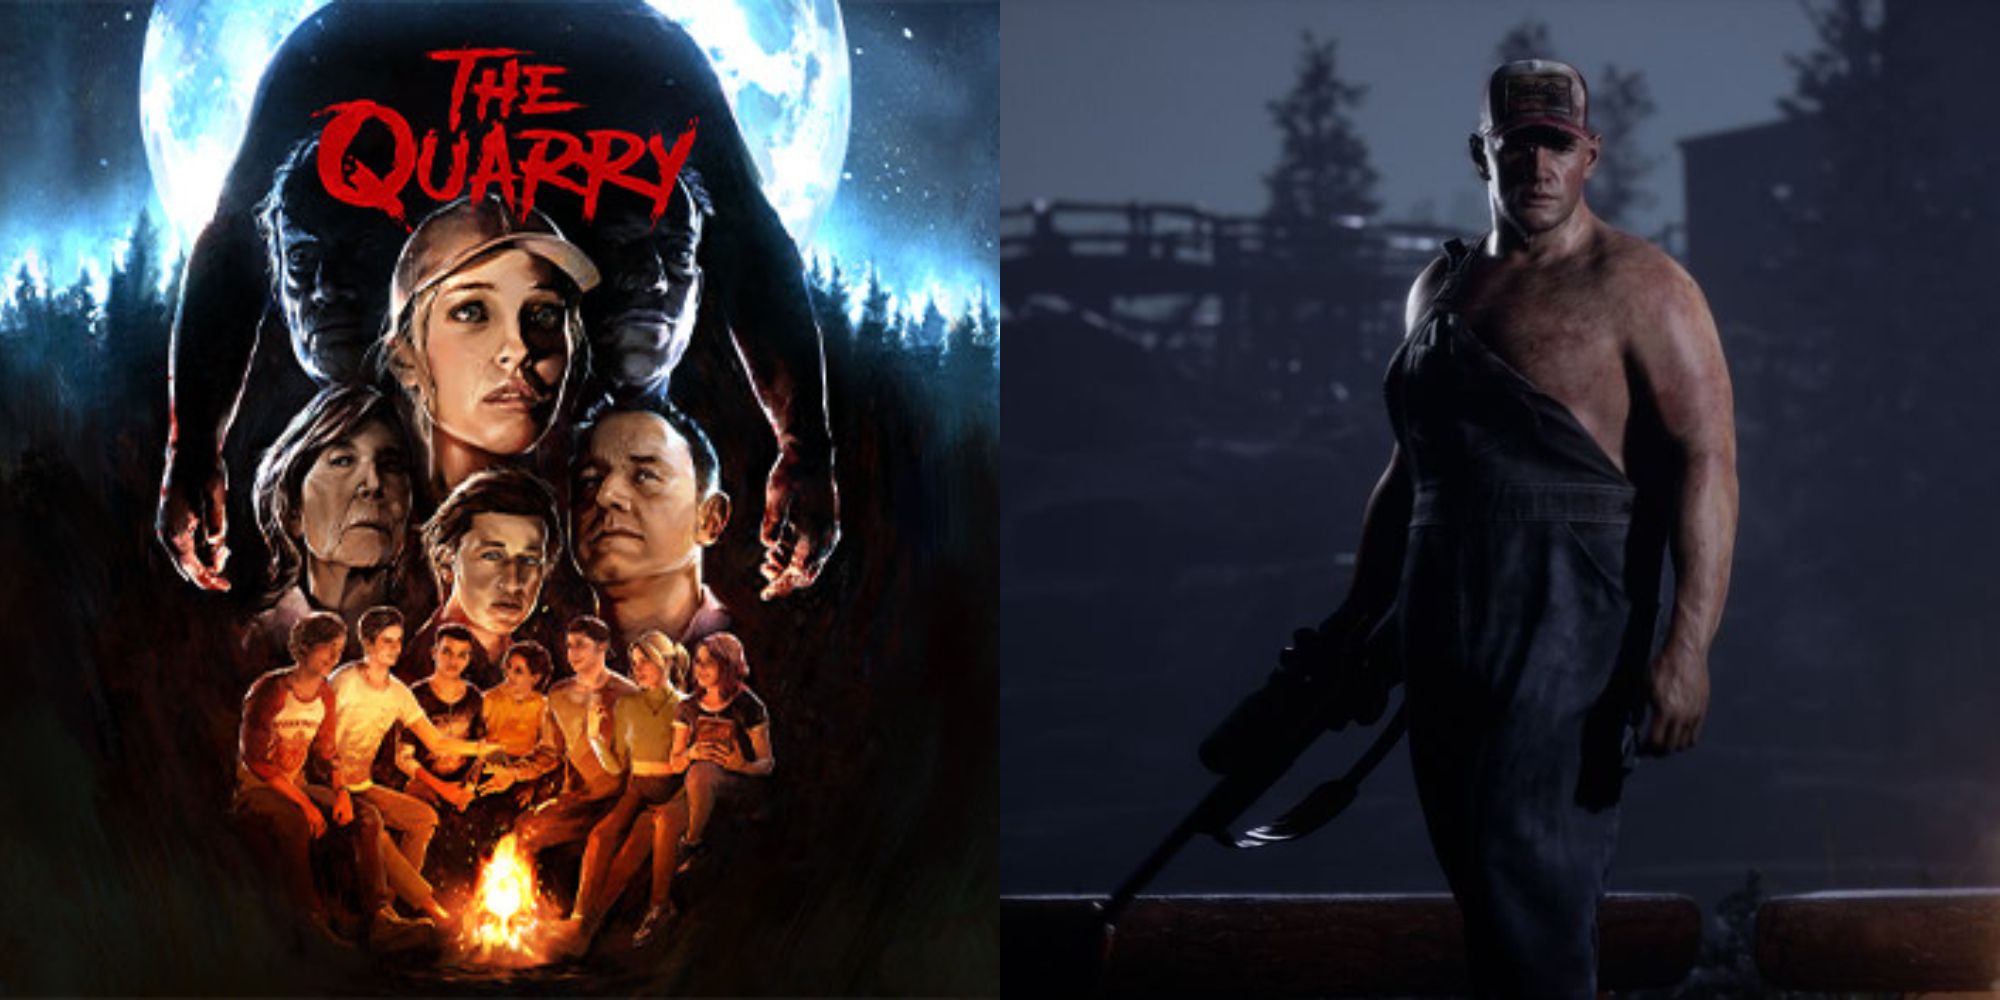 Split image showing the poster for The Quarry and the character Bobby.